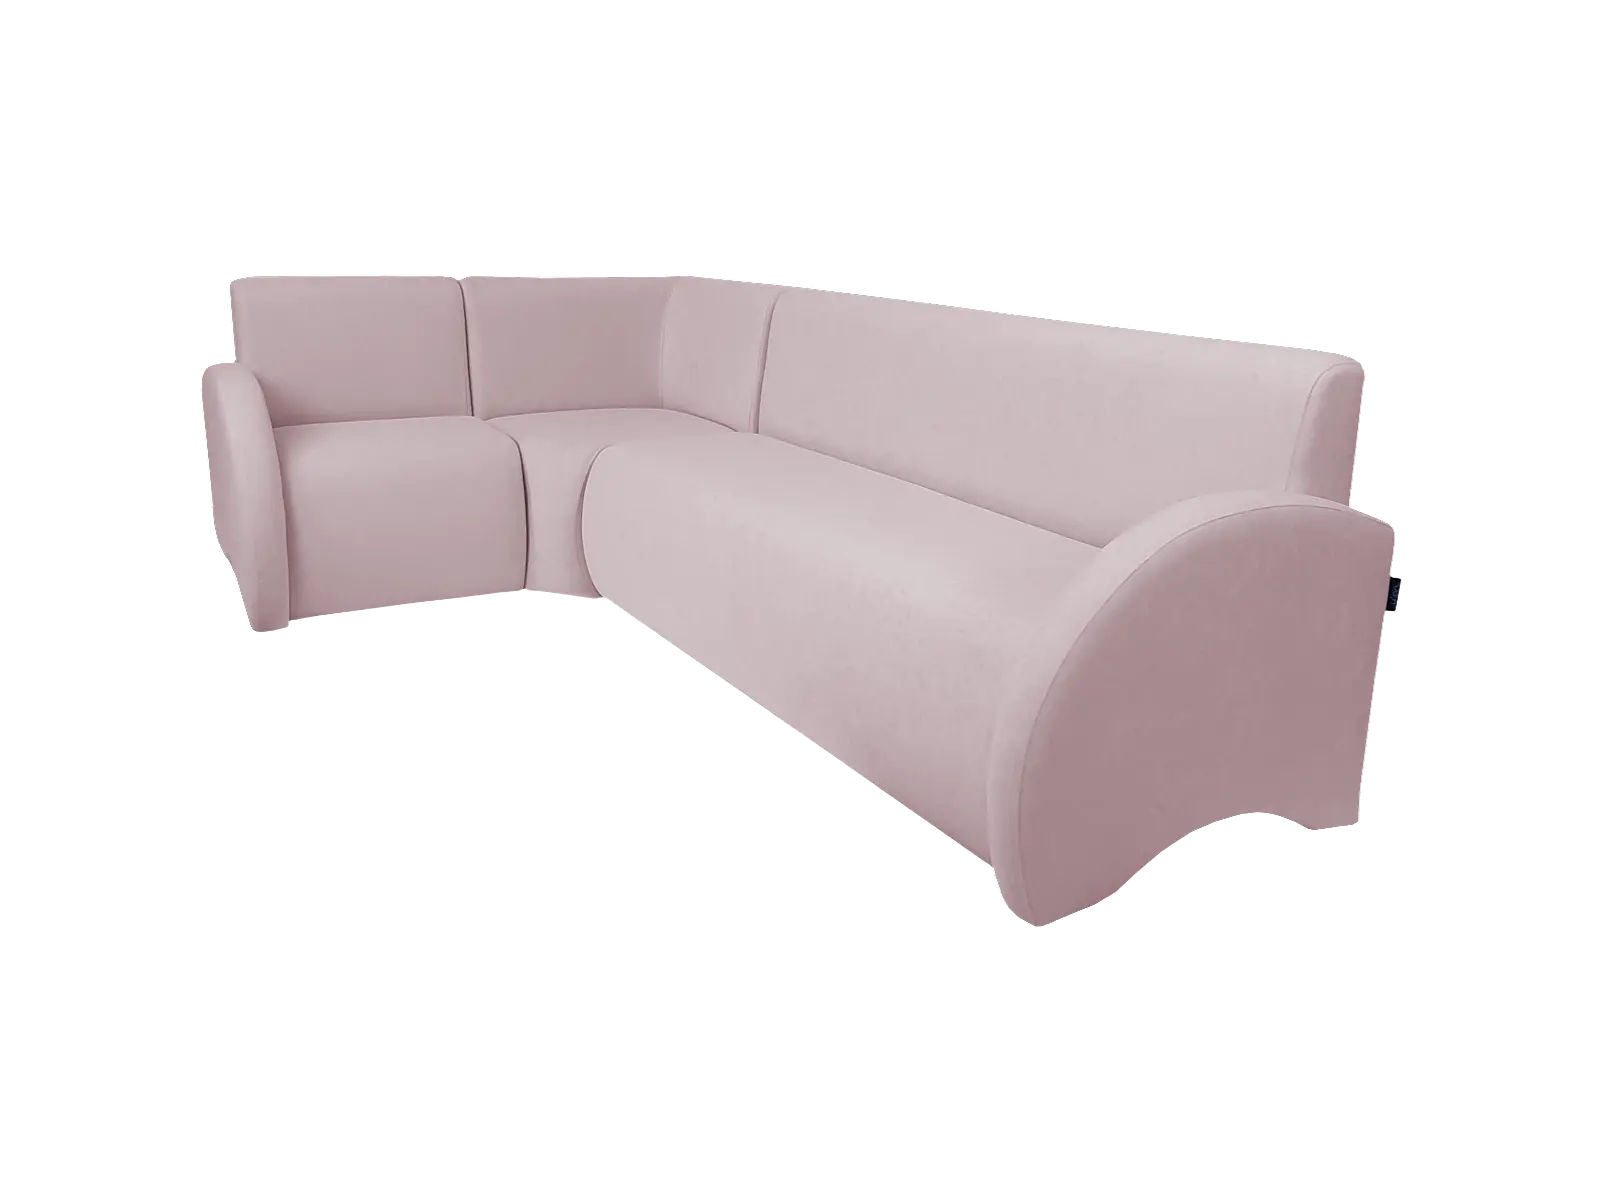 Rechtsseitiges Combo Couch Set